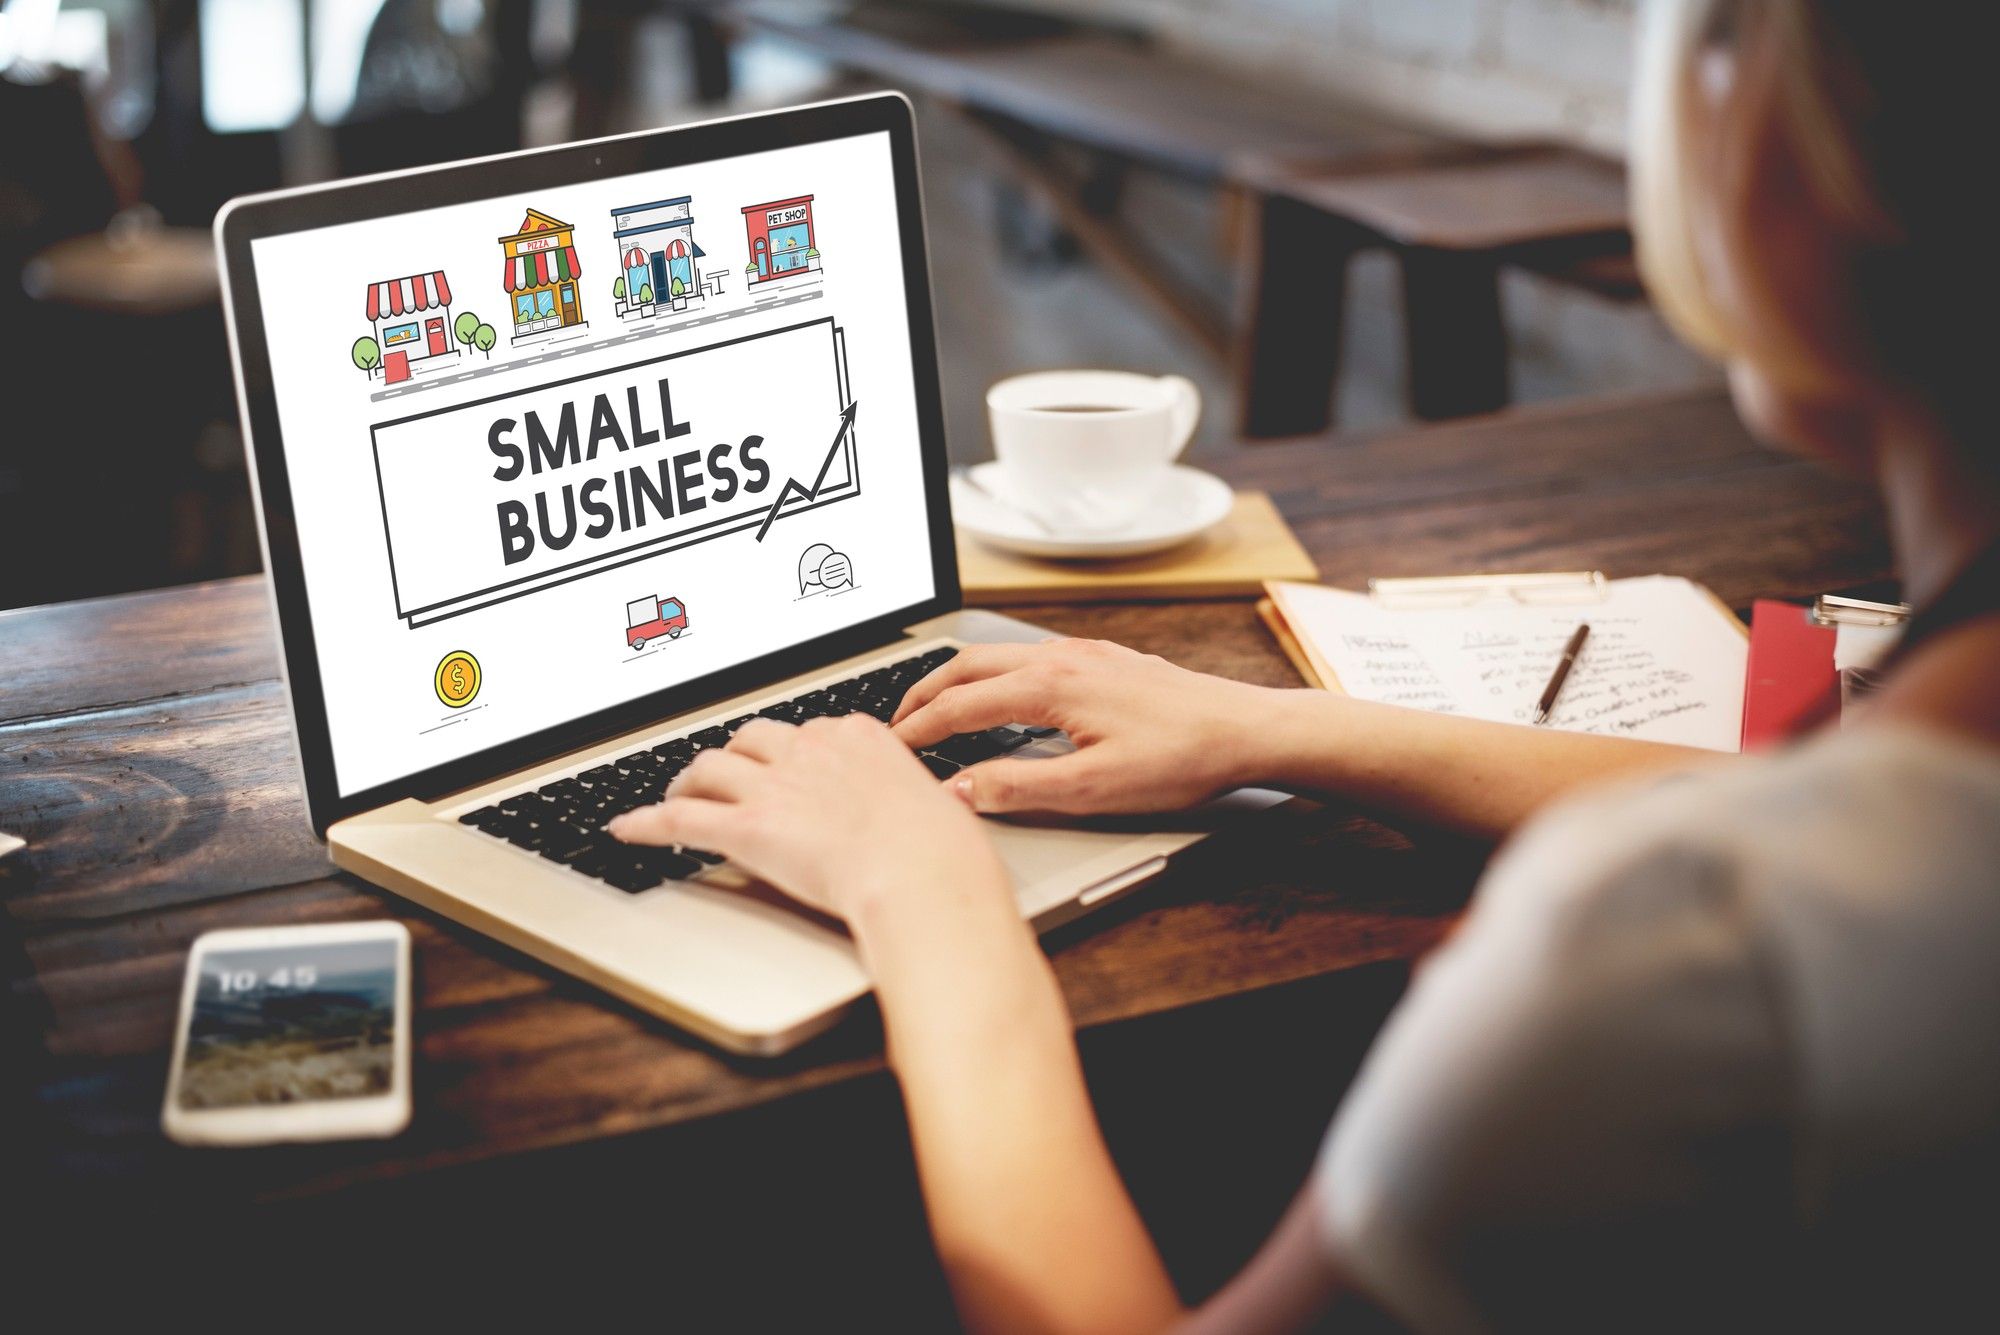 Minority owned small businesses have allegedly been denied small business loans.